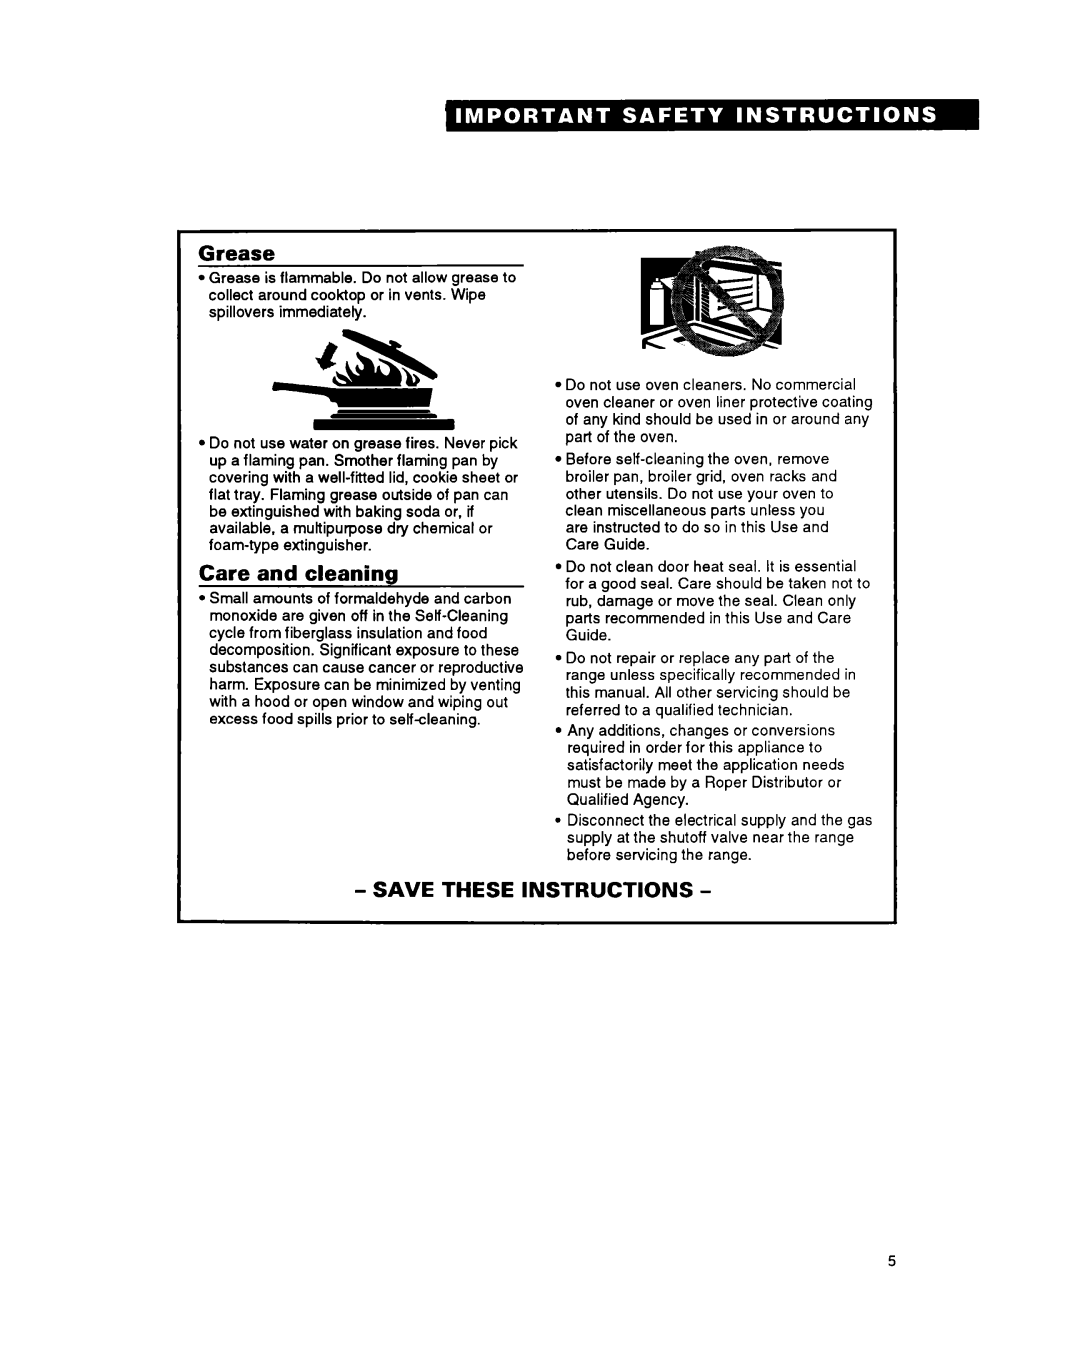 Whirlpool FGS387Y manual Grease, Care and cleaning, Save These Instructions 